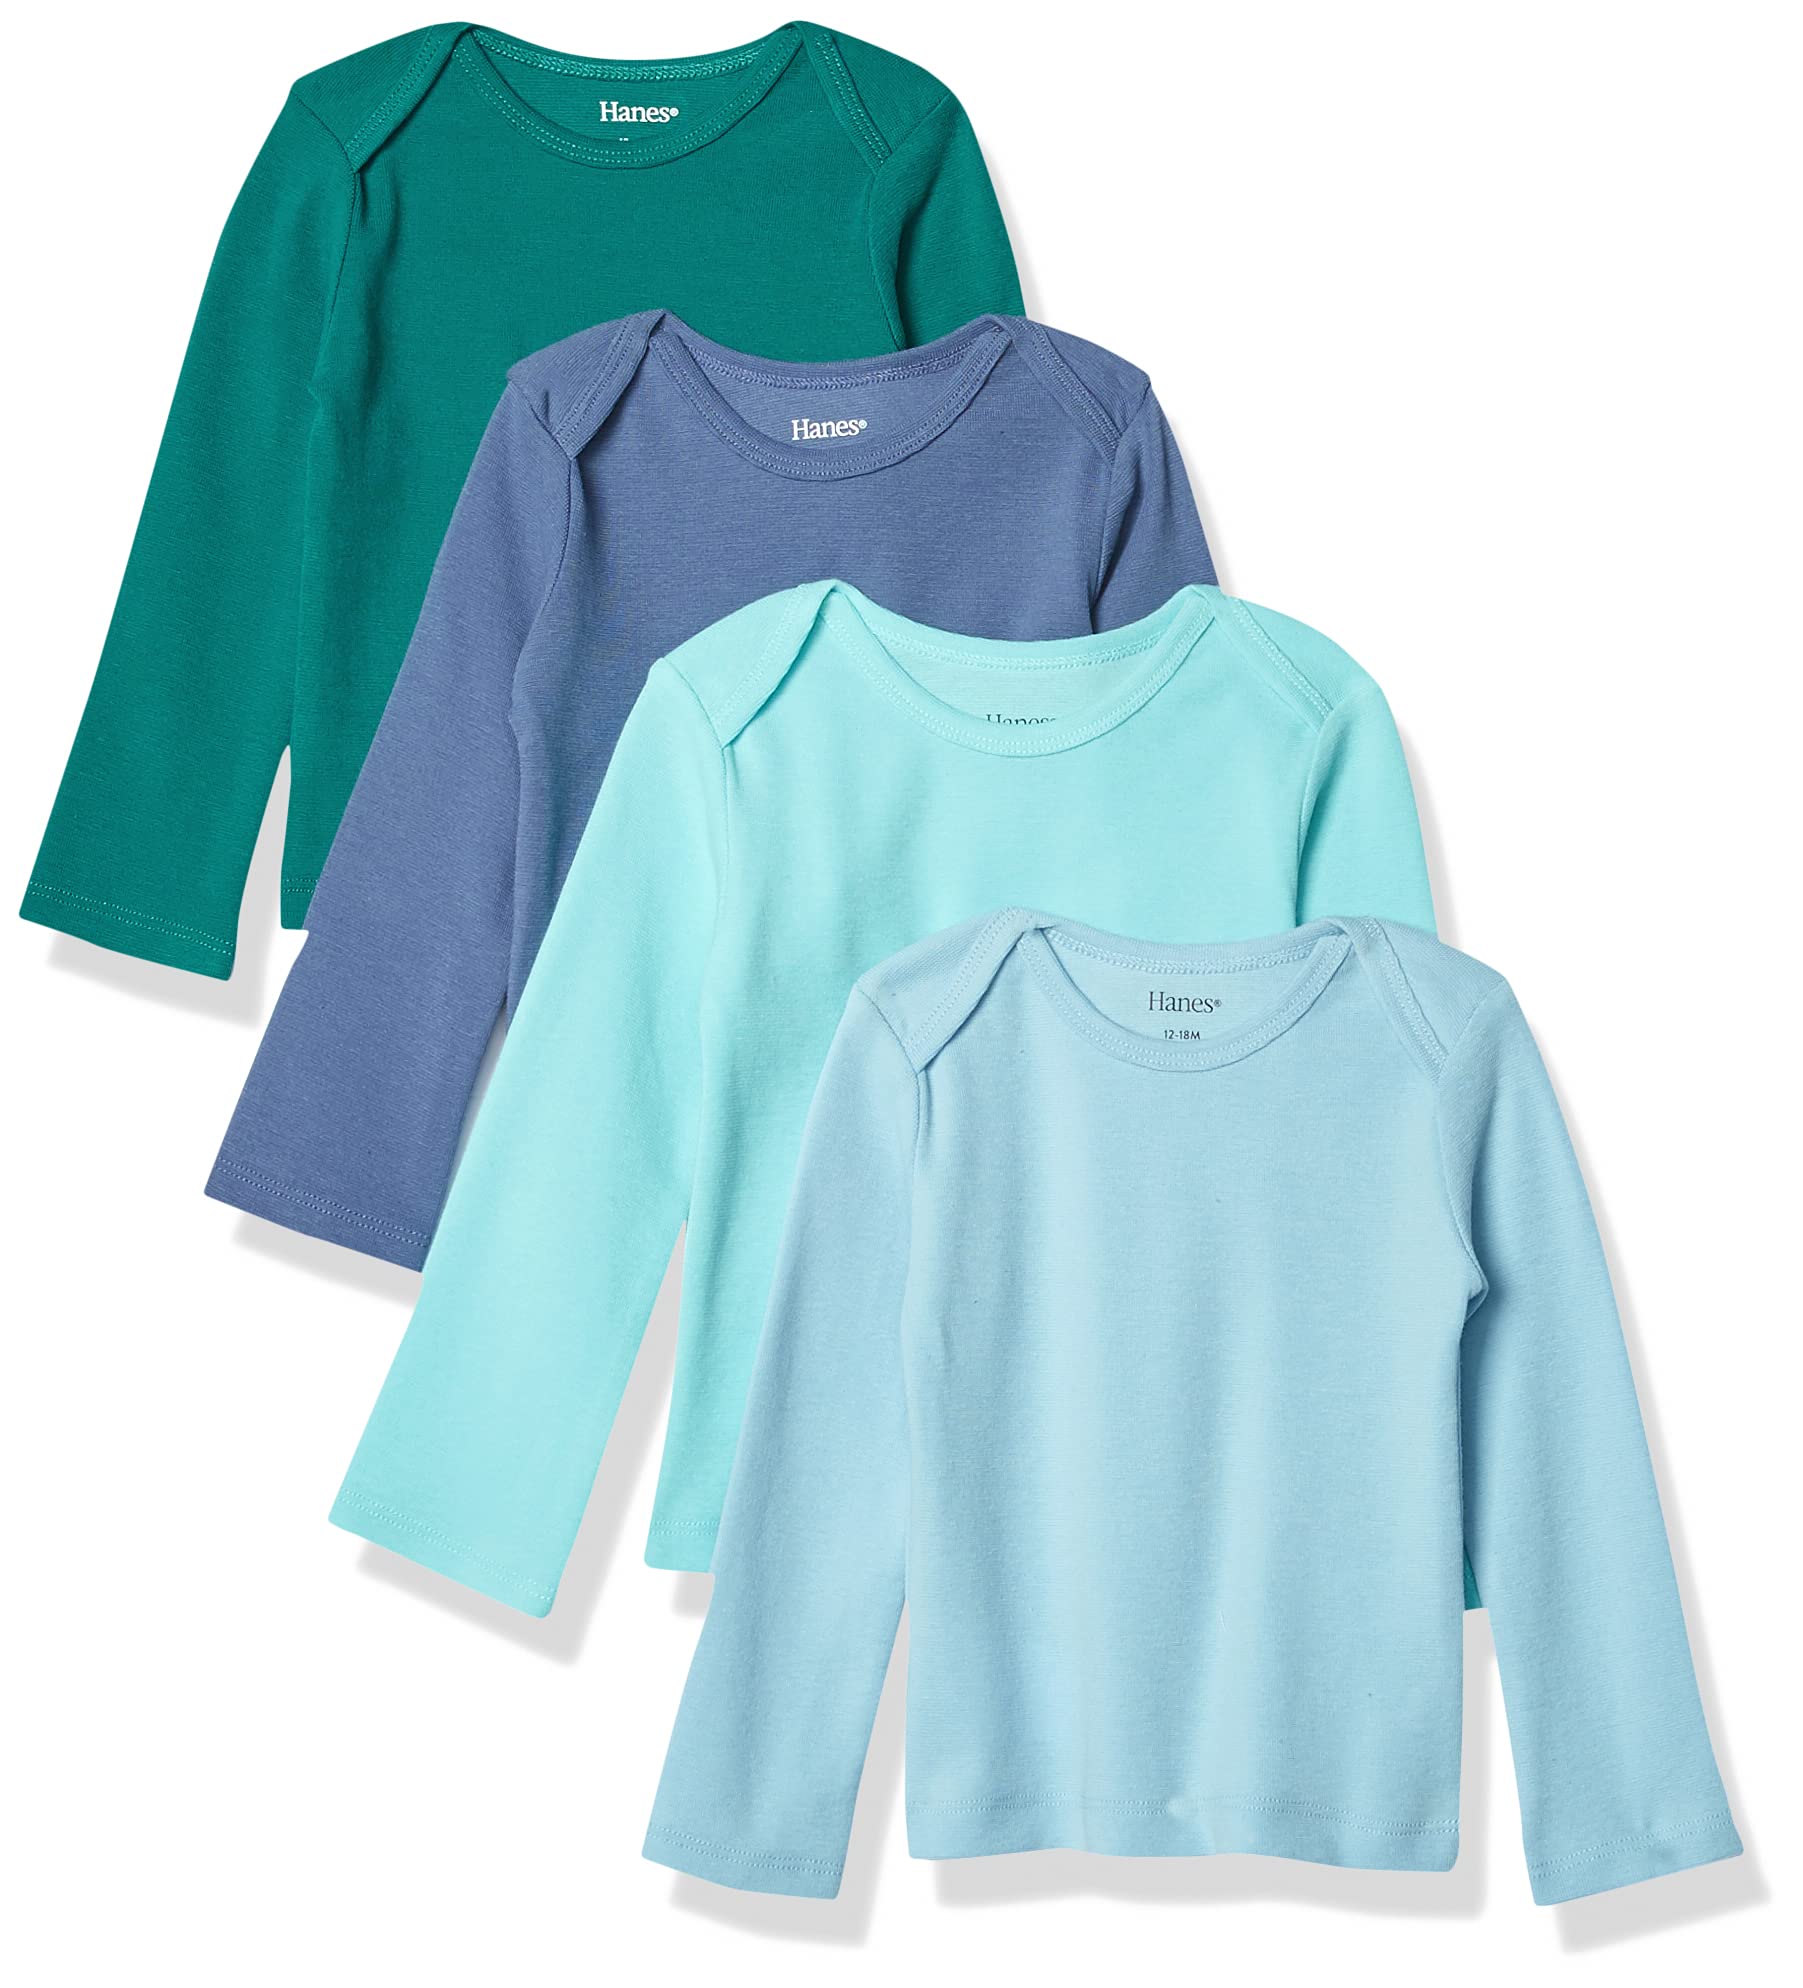 Hanes Girls Baby Long-Sleeve Undershirt, Flexy Soft Knit Expandable Shoulder Pullover for Babies & Toddlers, 4-Pack